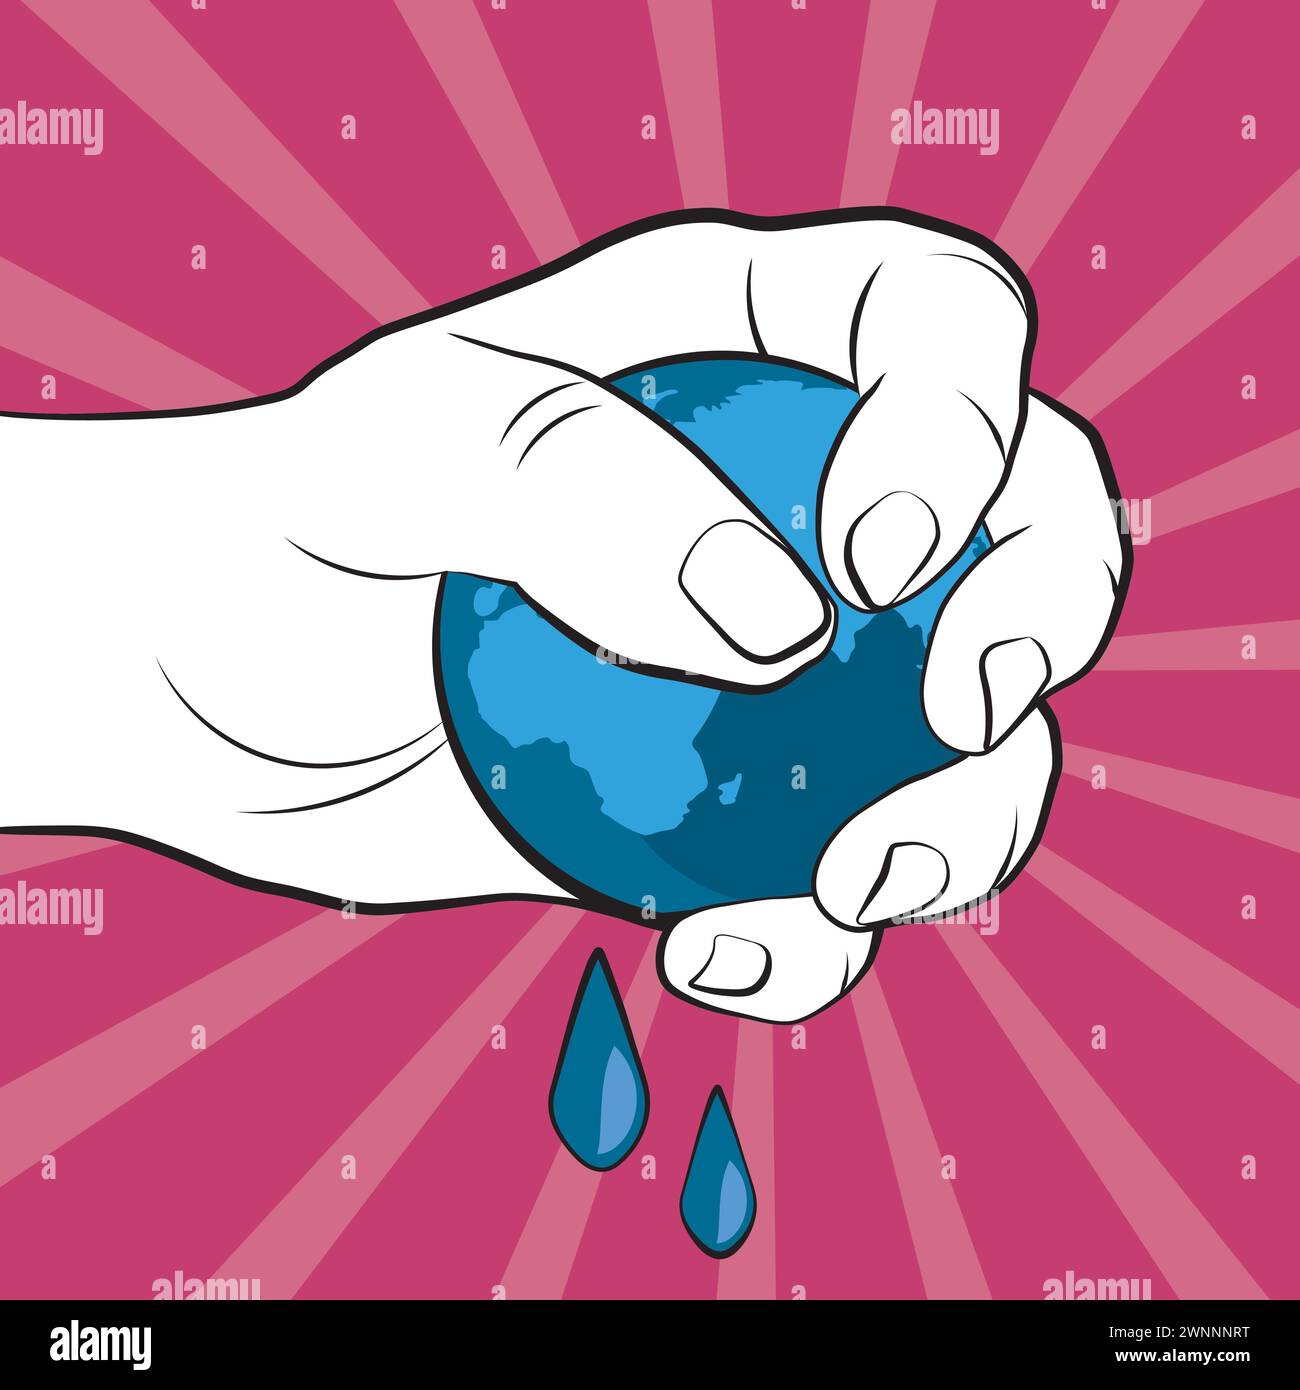 Illustrated hand squeezing a globe in pop art style Stock Vector